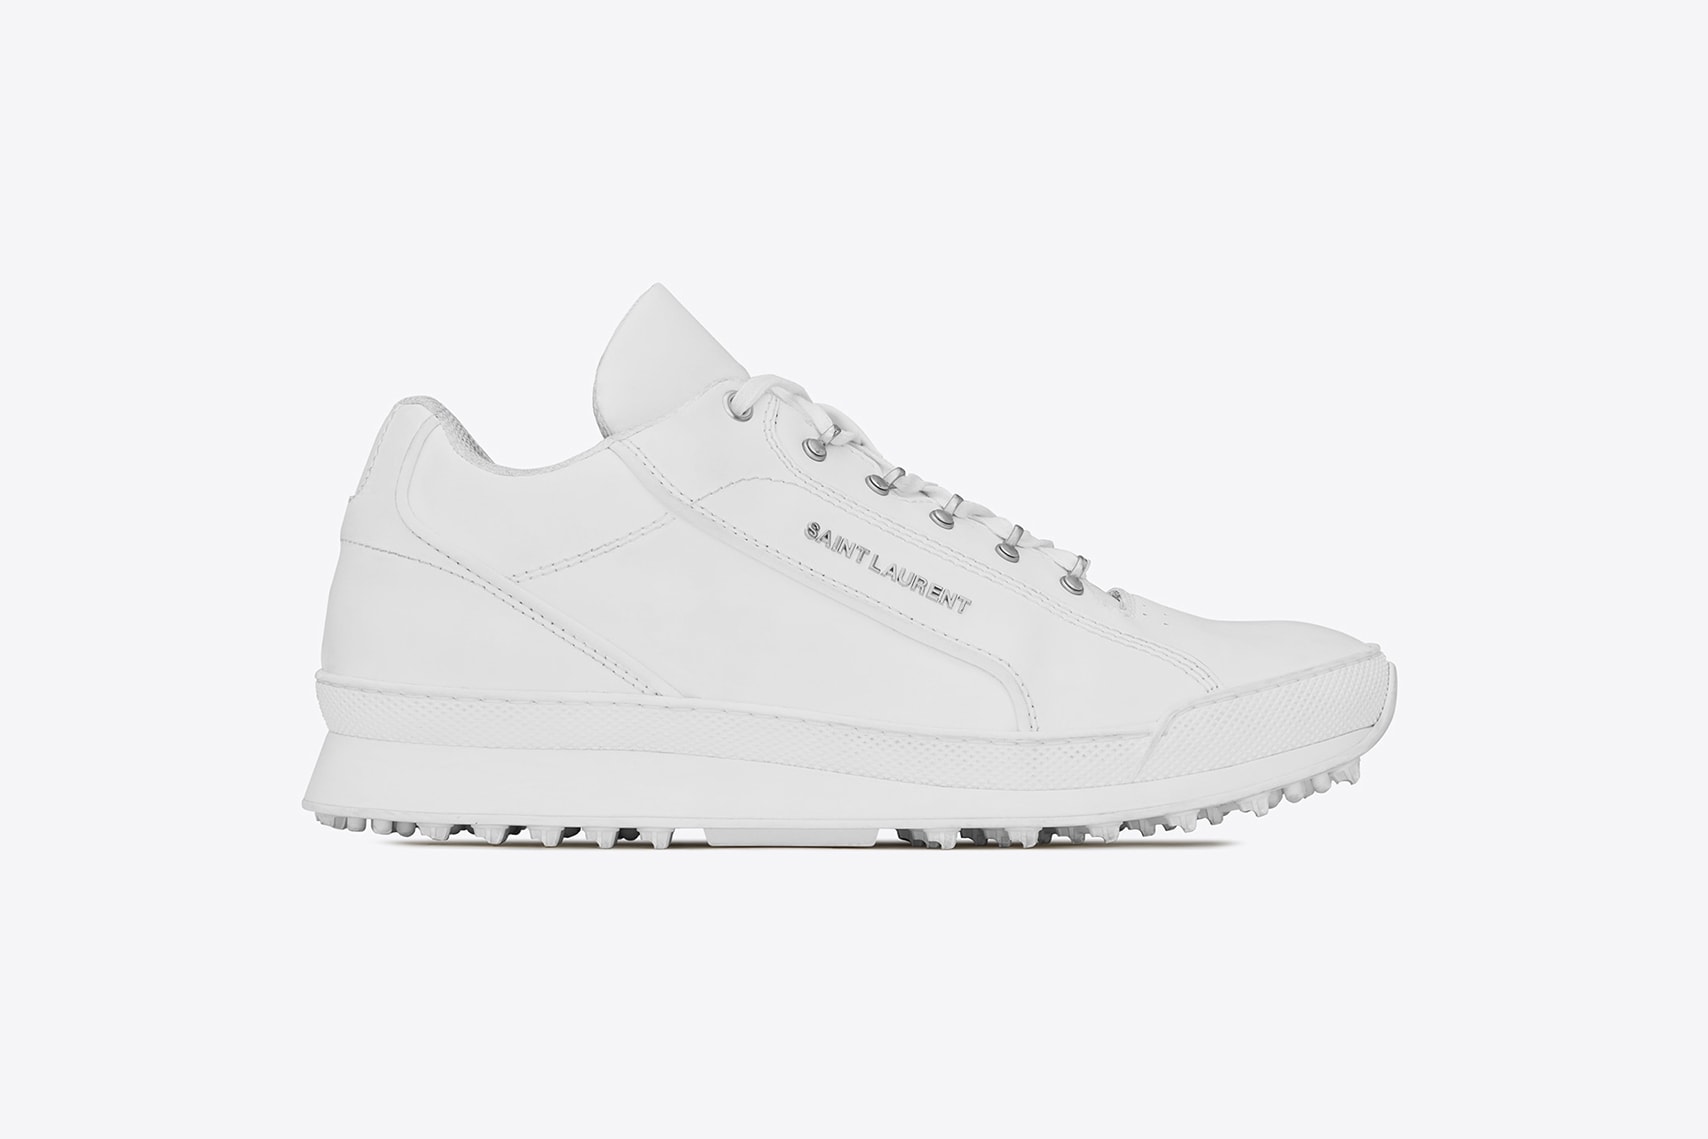 saint laurent jump sneaker premium white leather chunky shoe profile side view silver